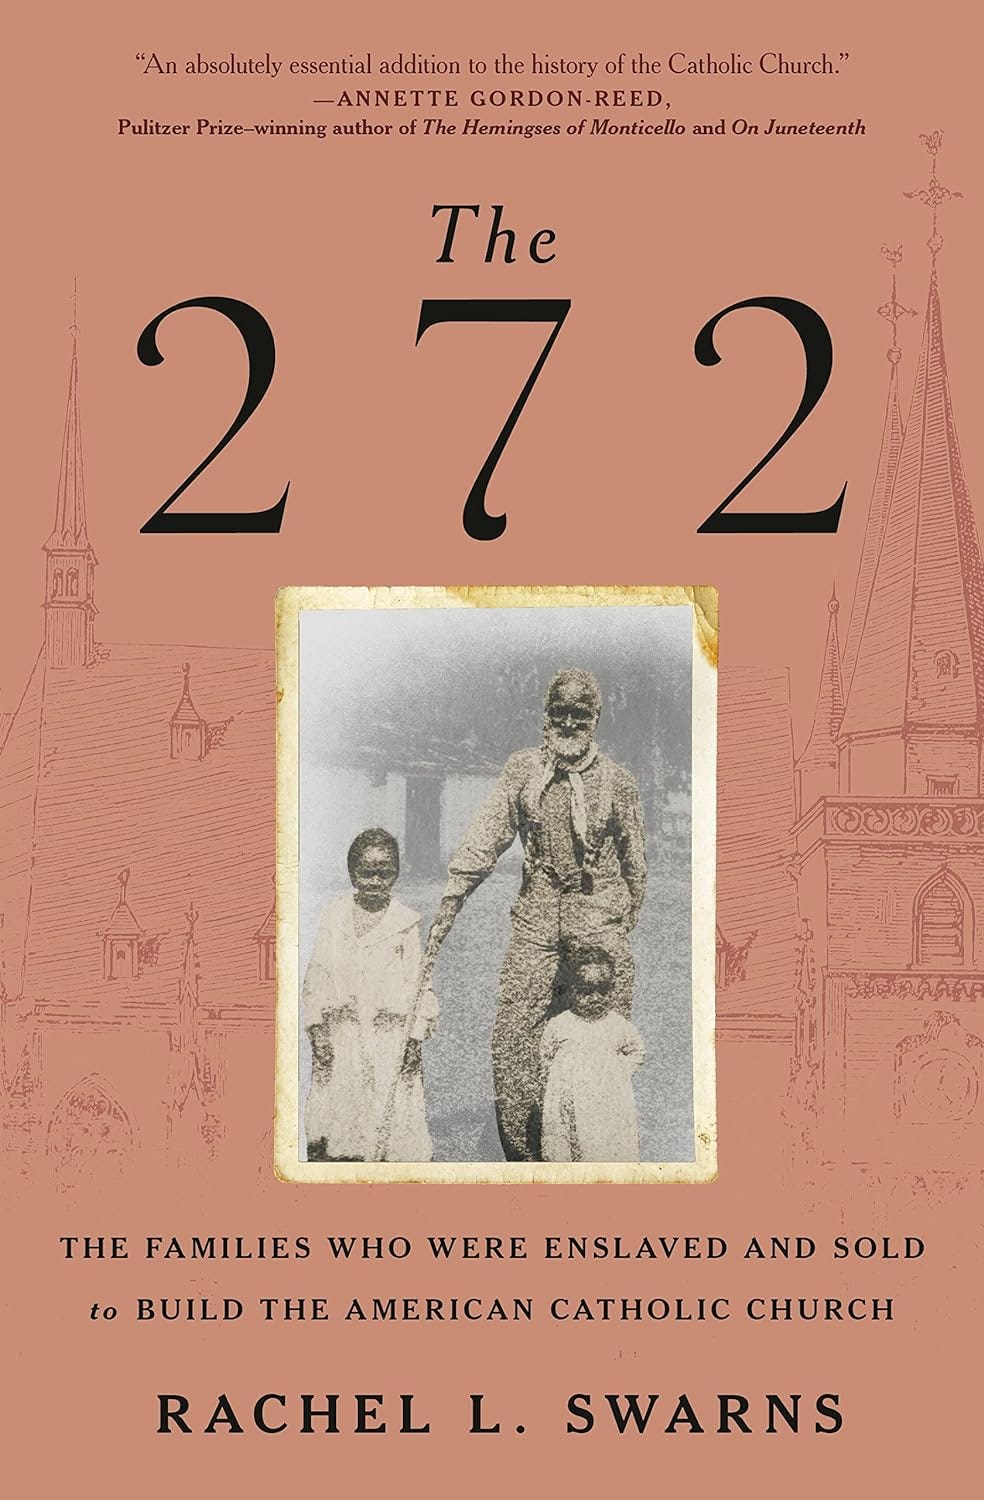 cover image for The 272 by Rachel L. Swarns